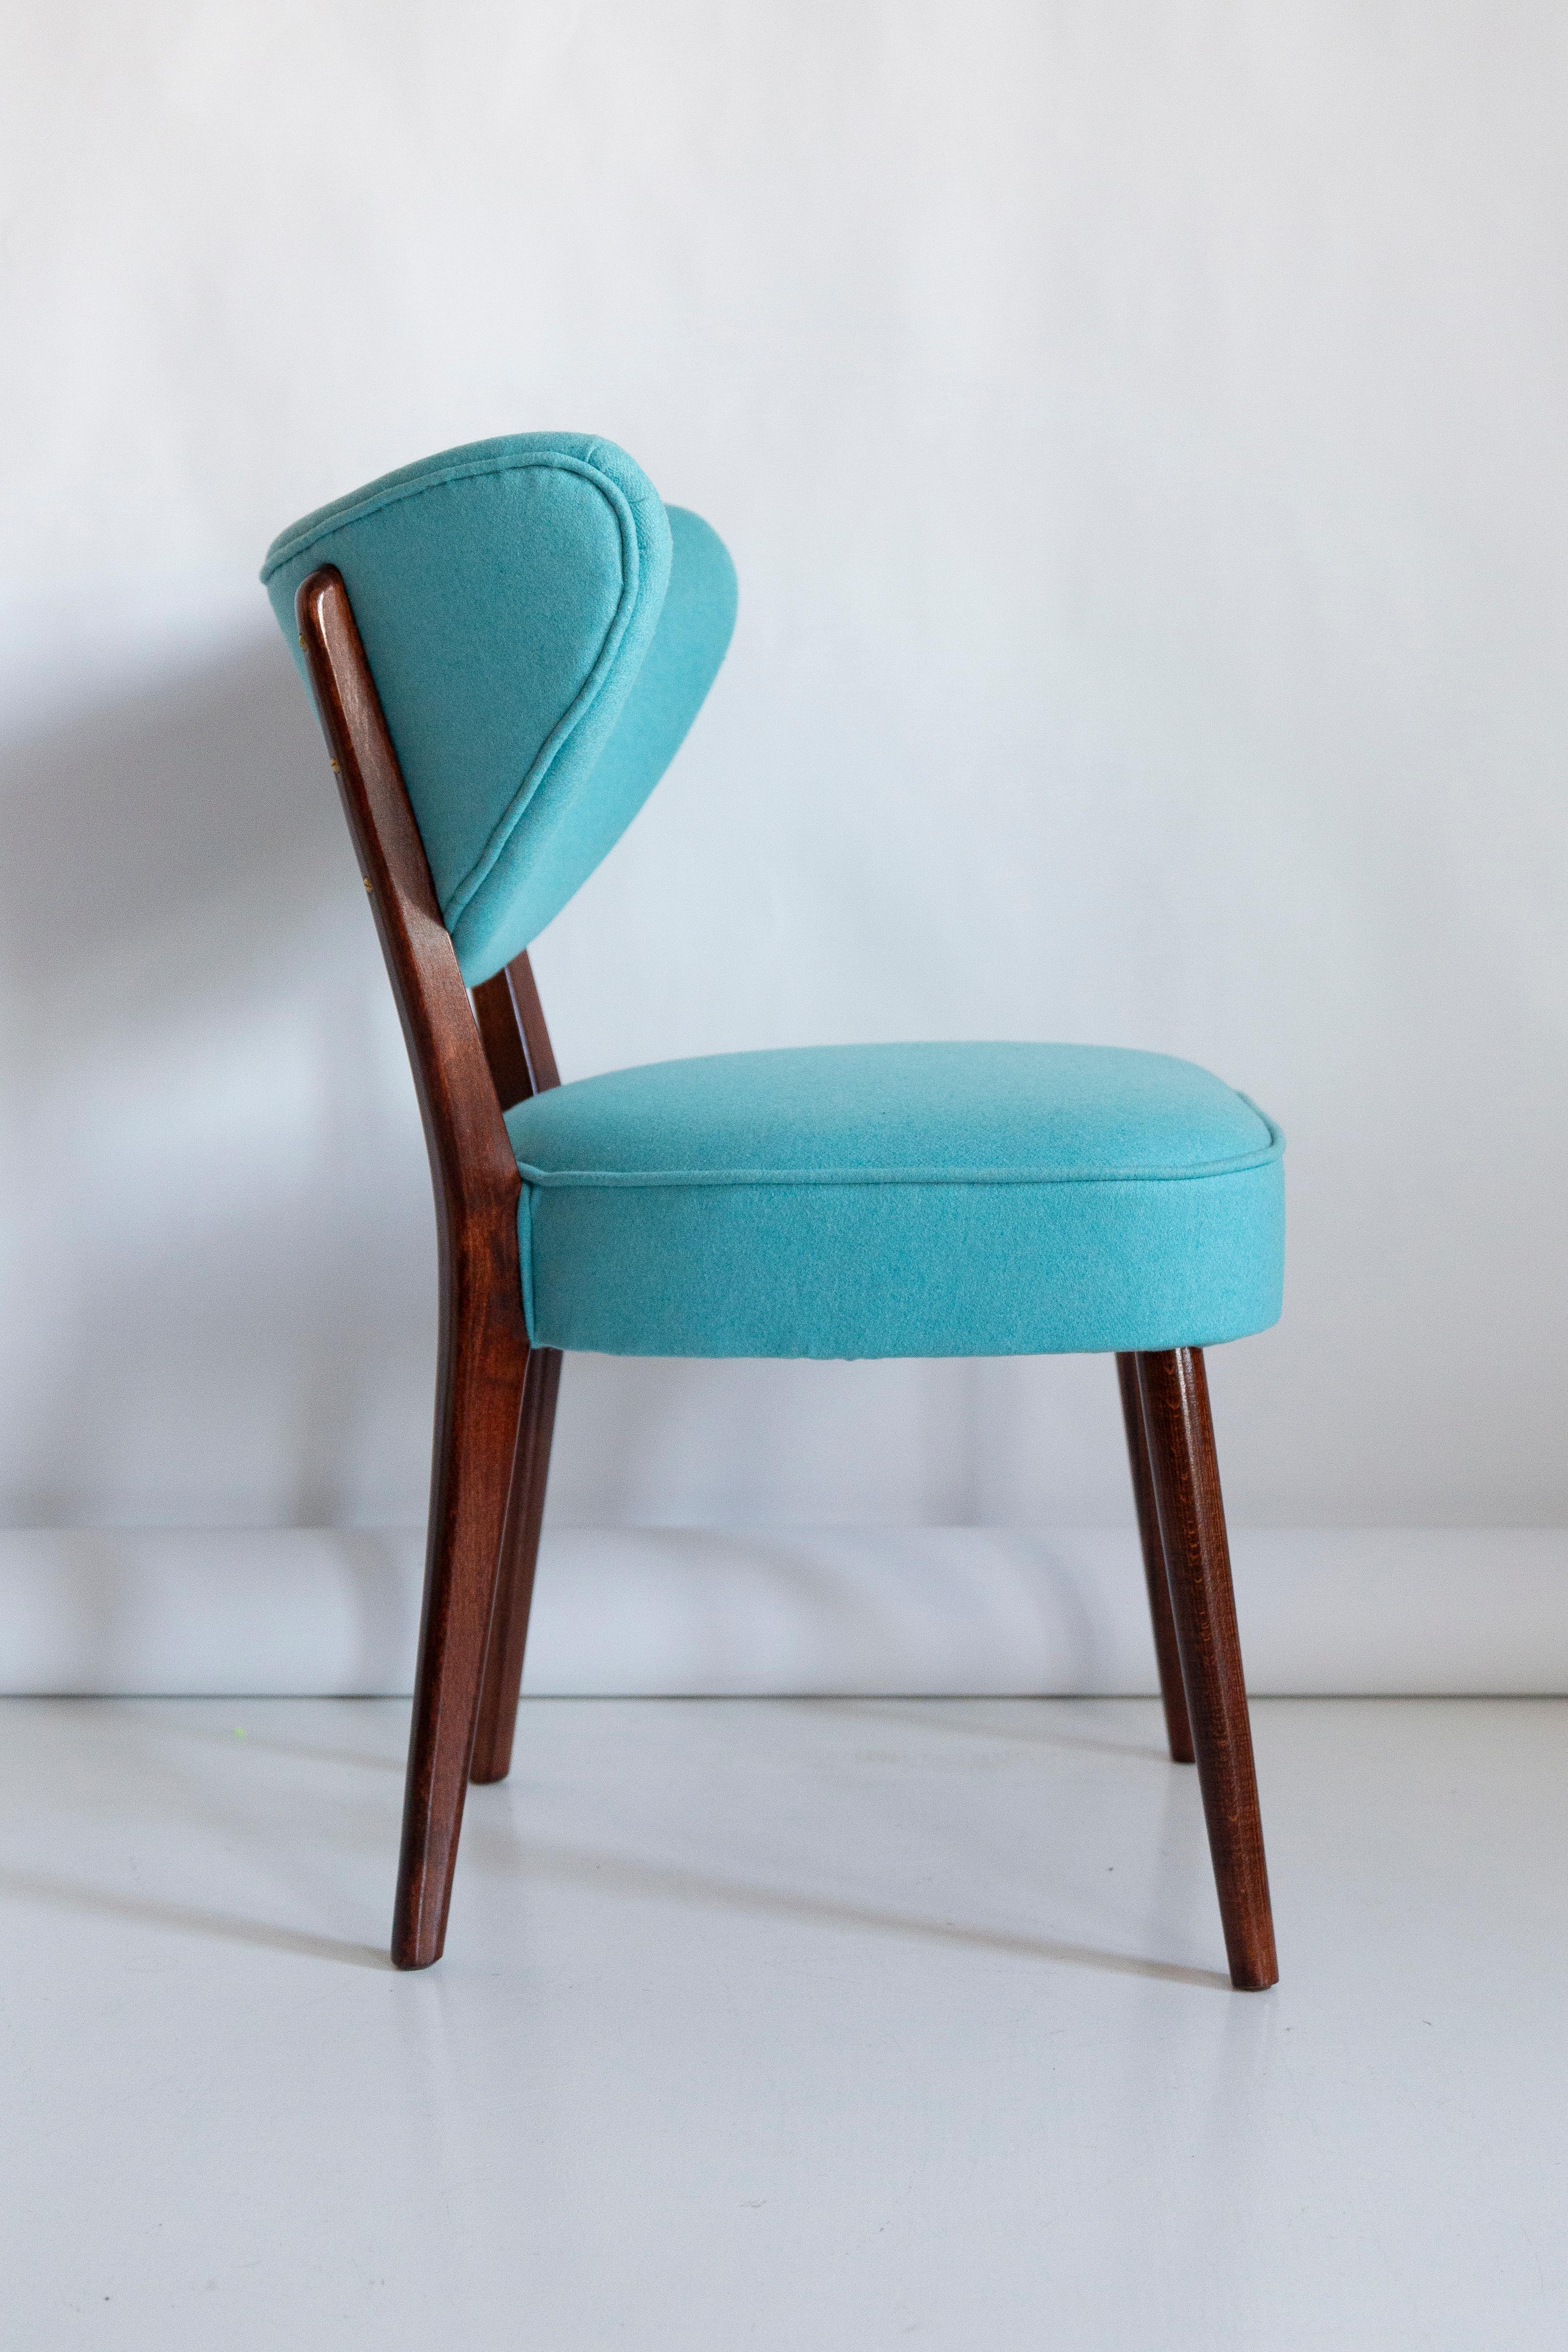 Hand-Painted Set of Ten Shell Dining Chairs, Turquoise Wool, by Vintola Studio, Europe. For Sale